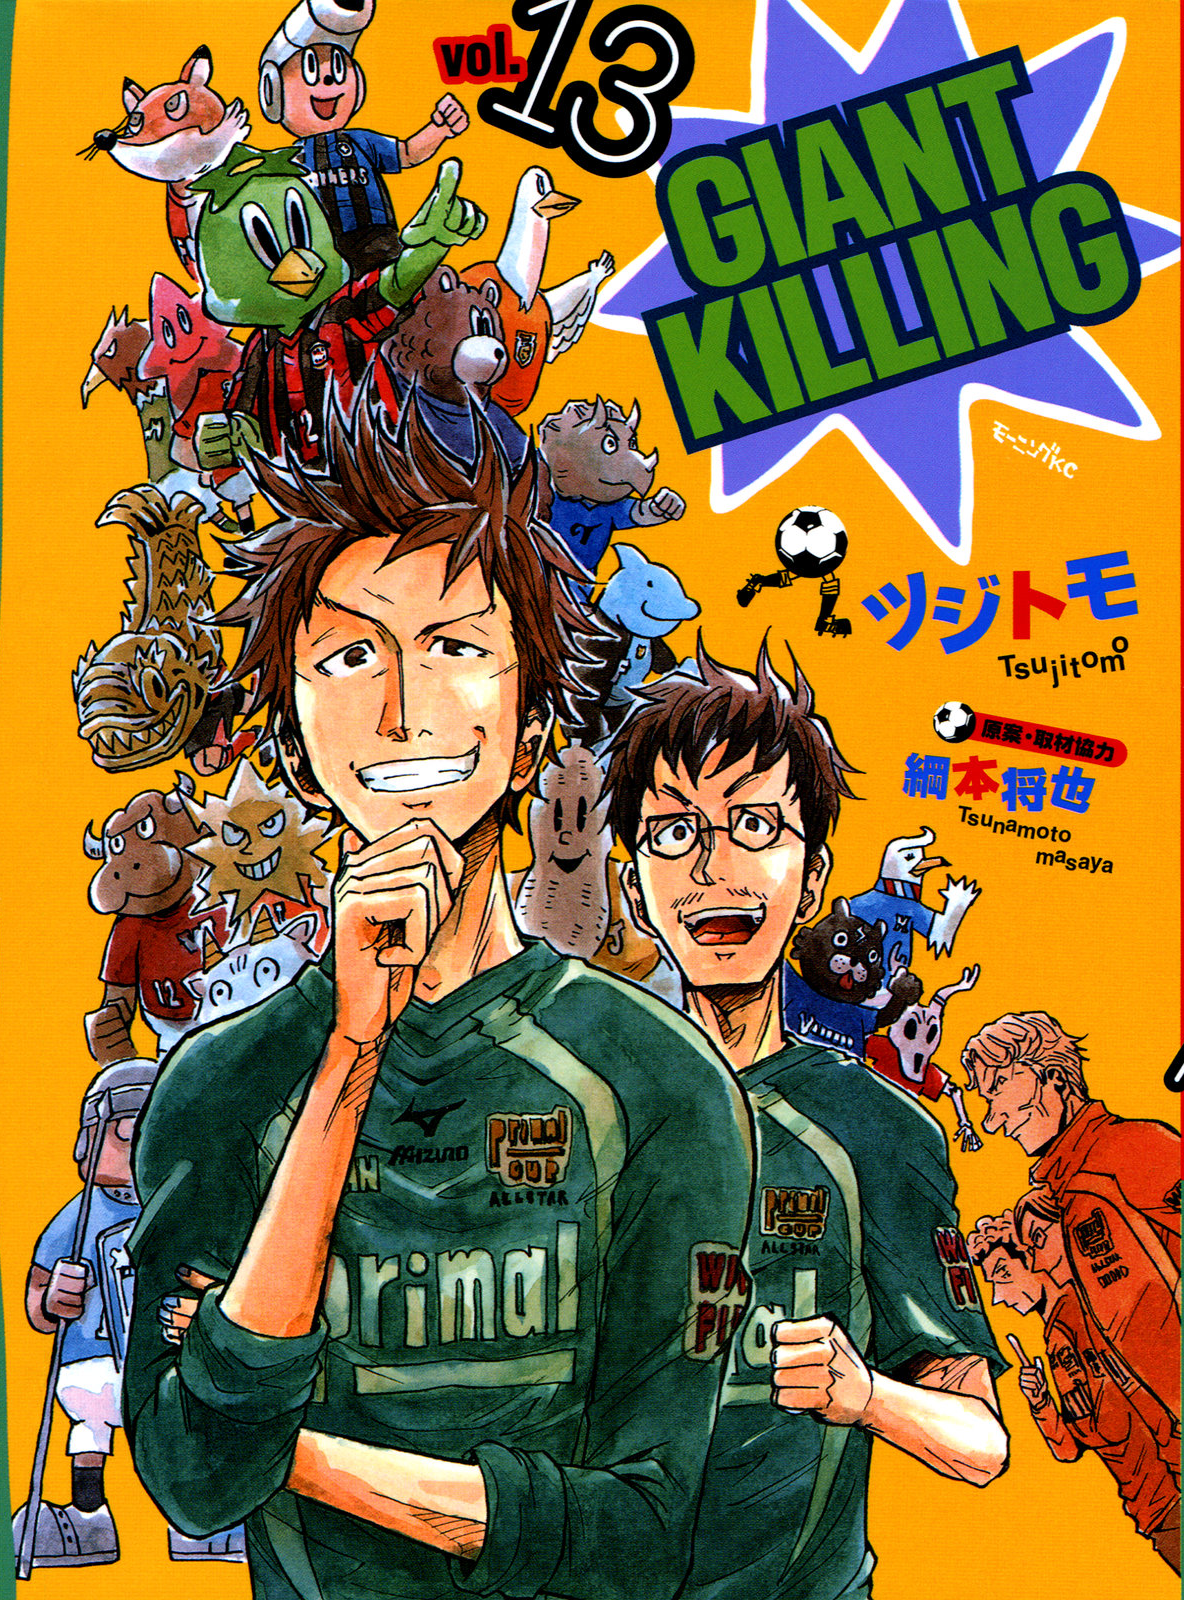 GIANT KILLING [In Japanese] [Japanese Edition] Vol.1